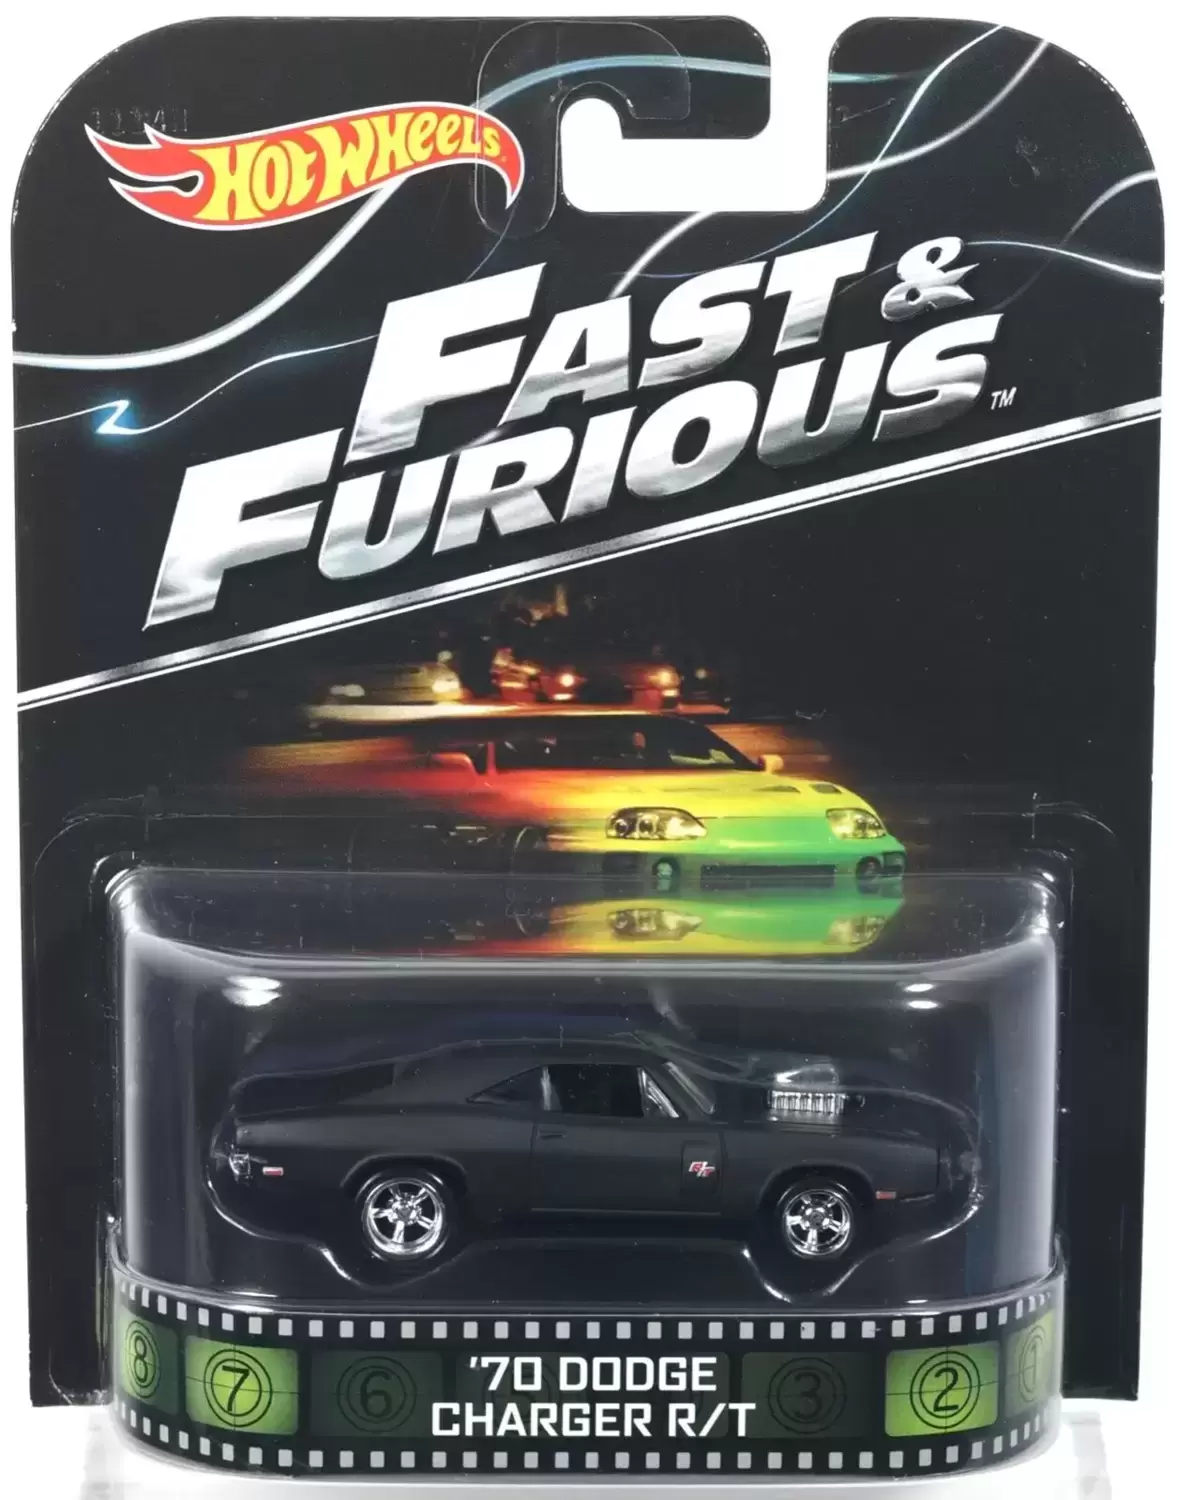 Fast & Furious - 70 Dodge Charger R/T - Retro Entertainment Hot Wheels model